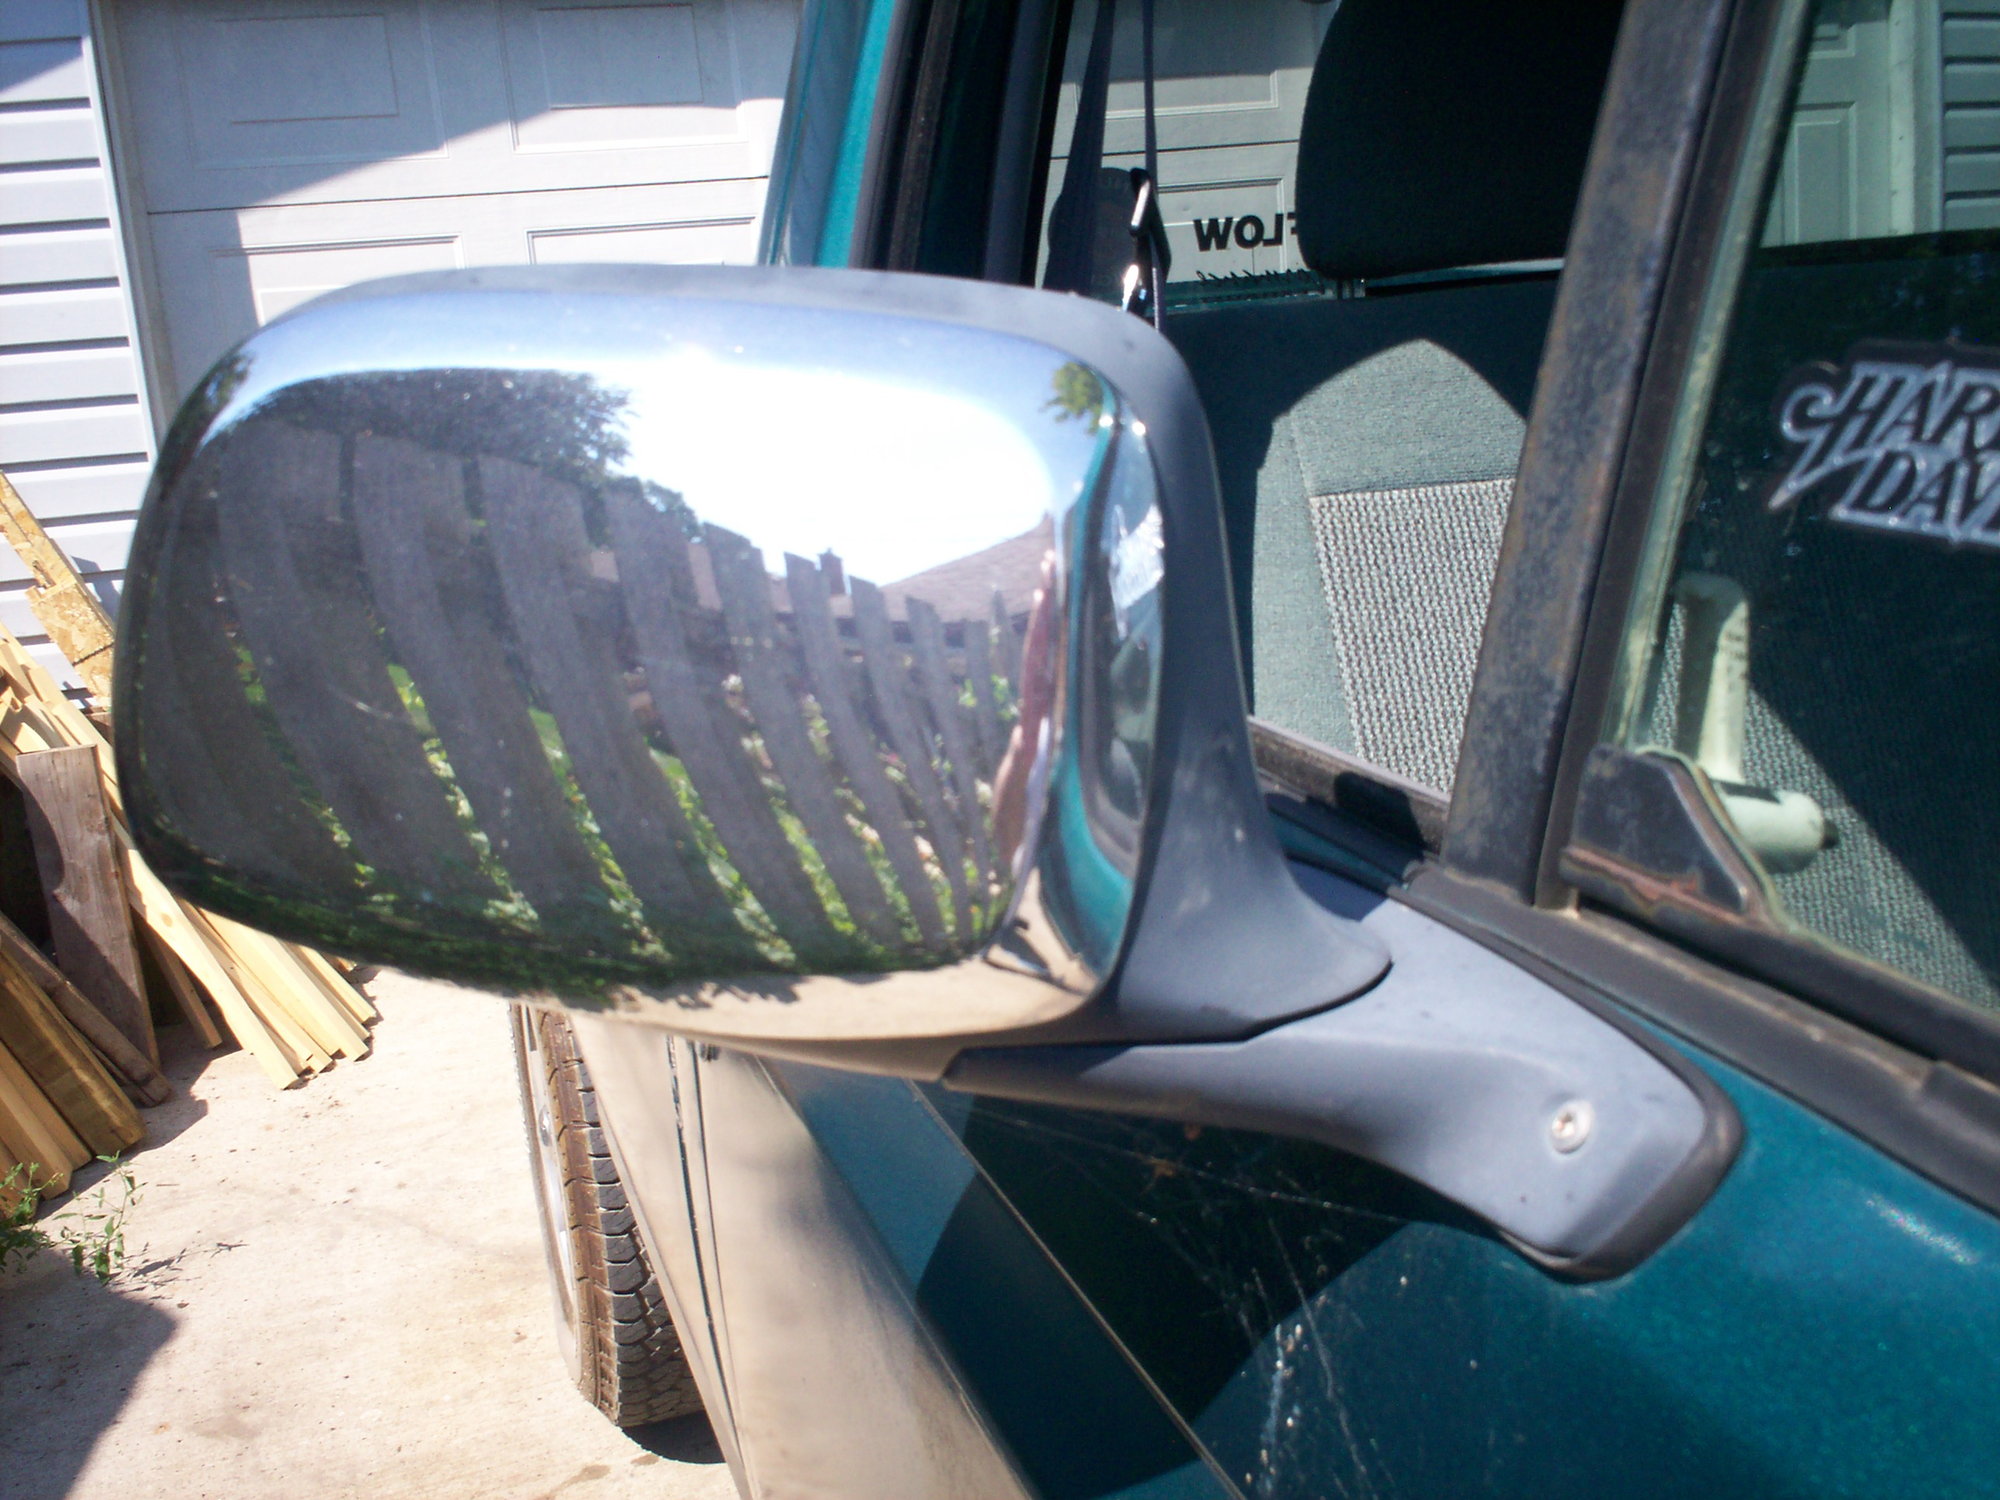 Pair of Manual Side View Chrome Mirrors with Metal Housing Replacement for Ford Pickup Truck SUV